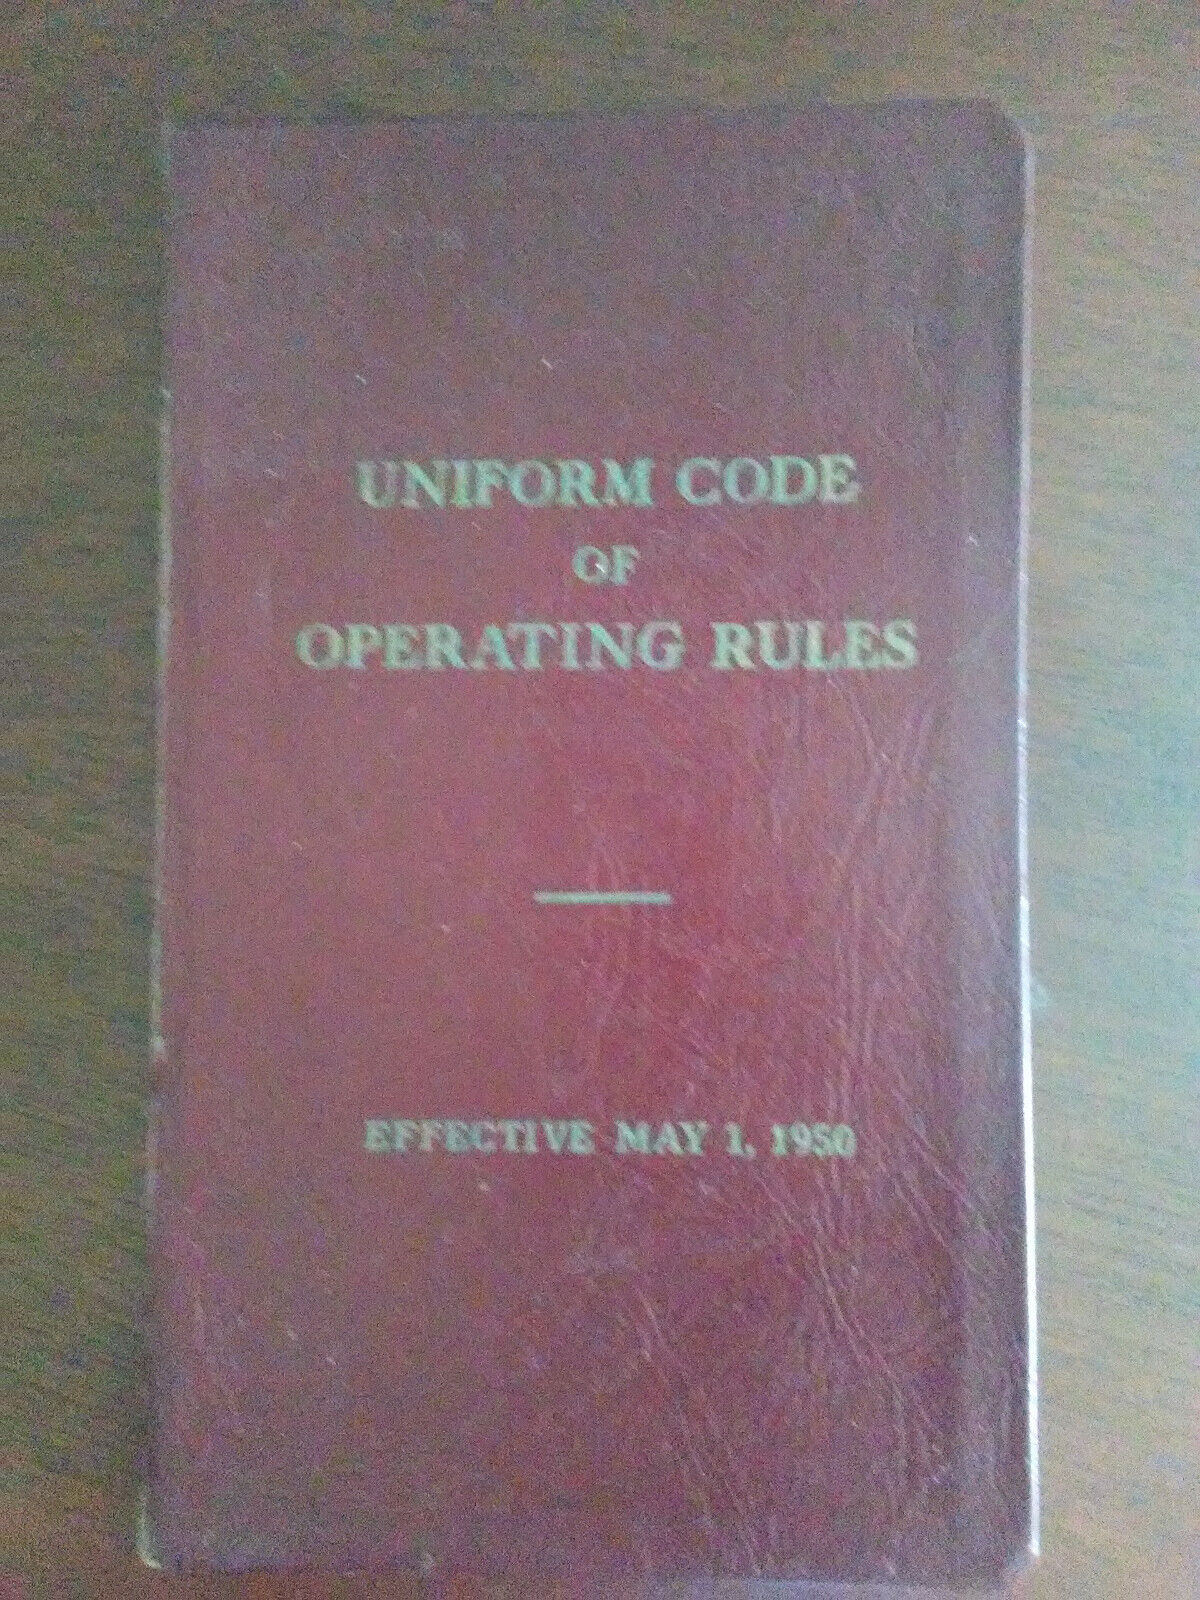 UNIFORM CODE OF OPERATING RULES EFFECTIVE MAY 1, 1950